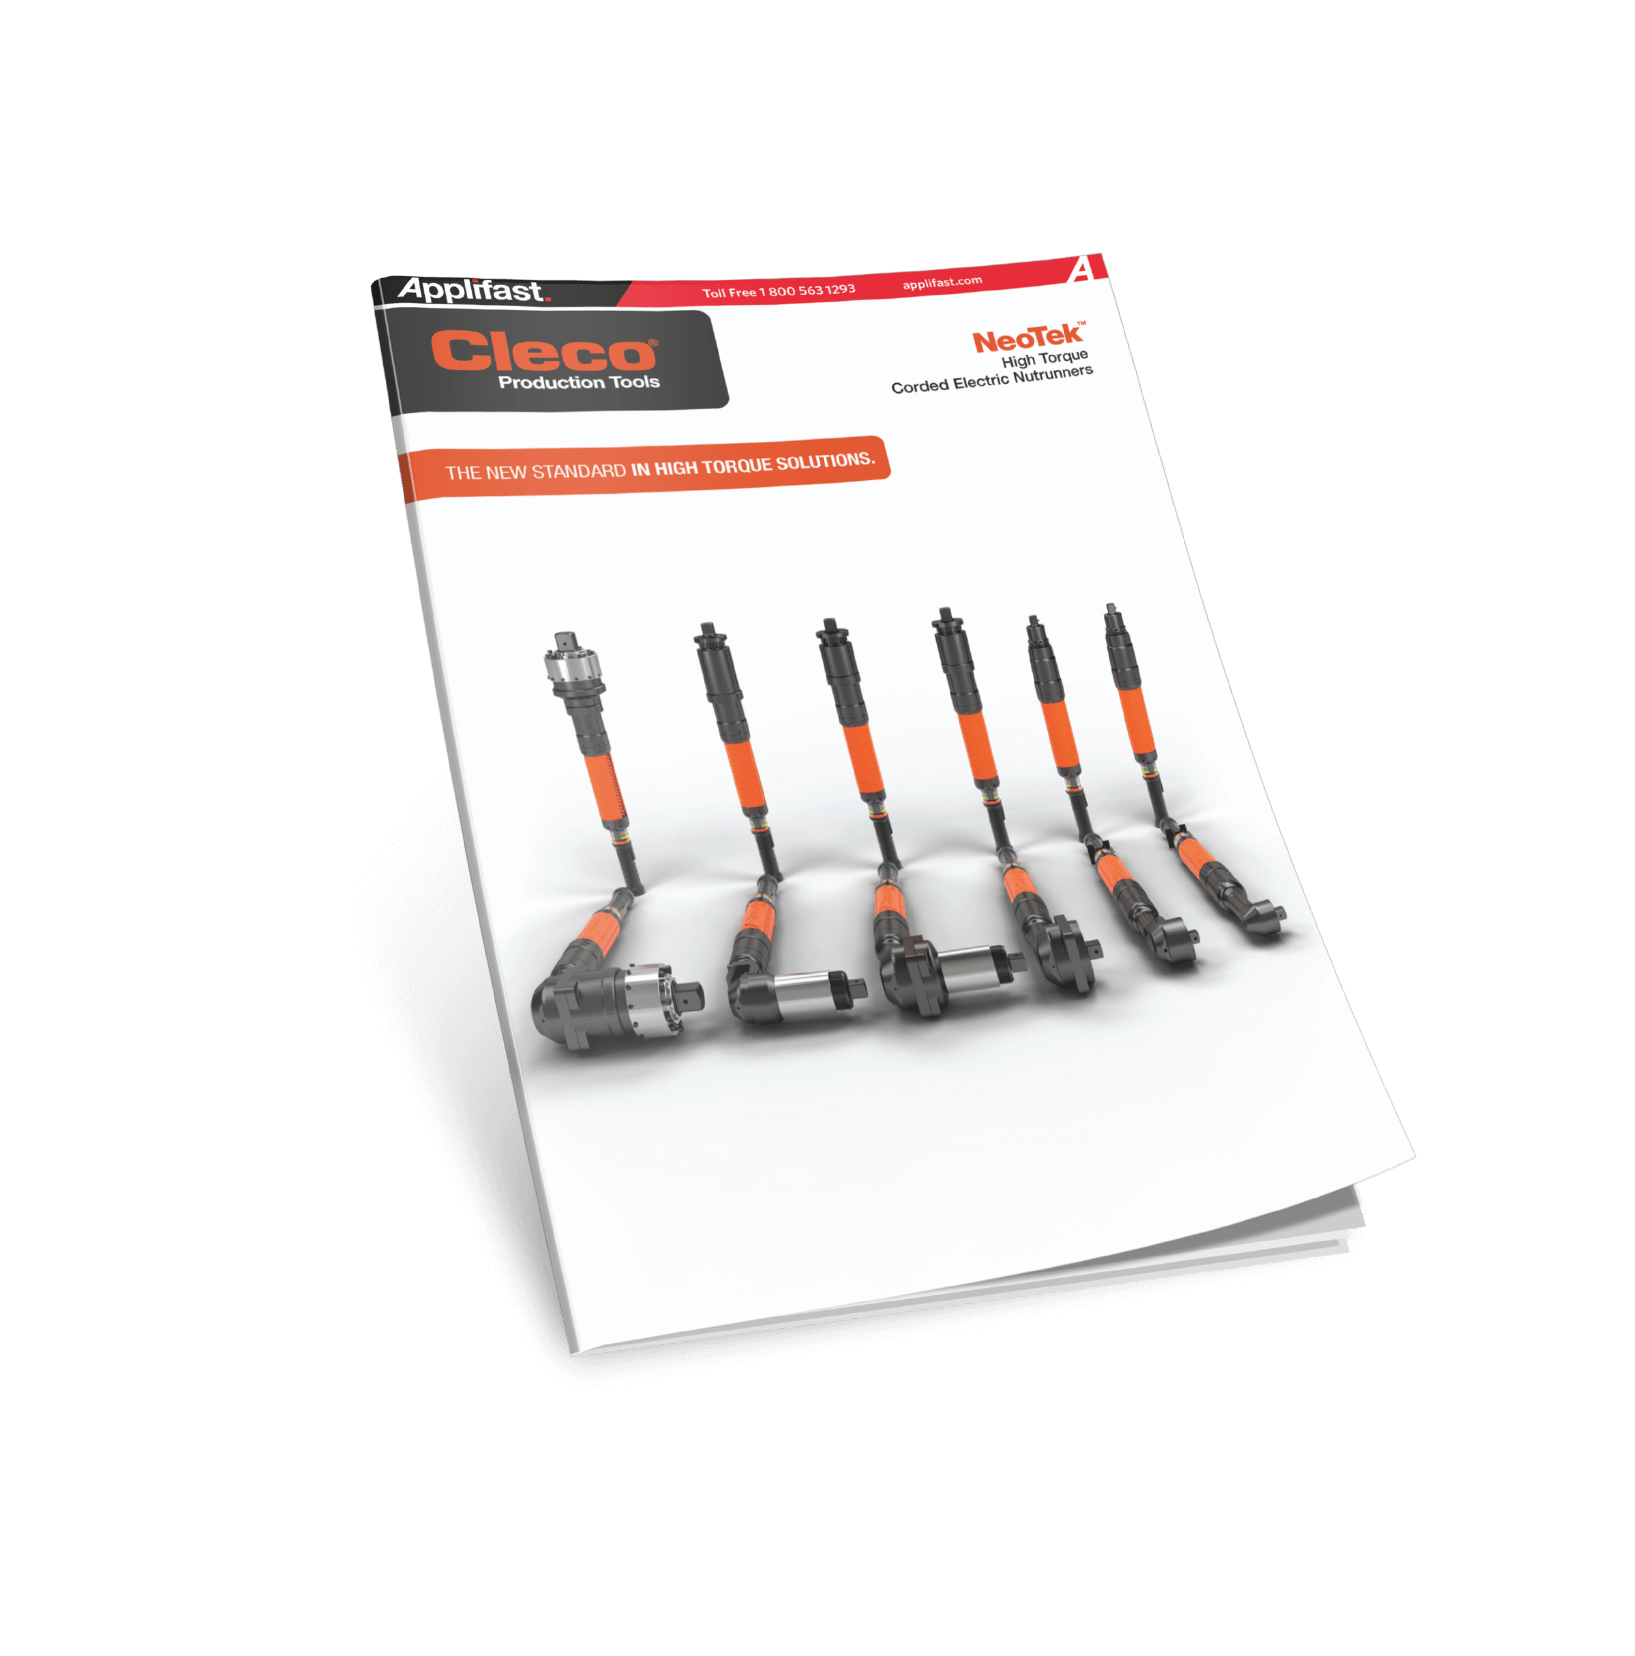 APPLIFAST - CLECO PRODUCTION TOOLS CATALOGUE